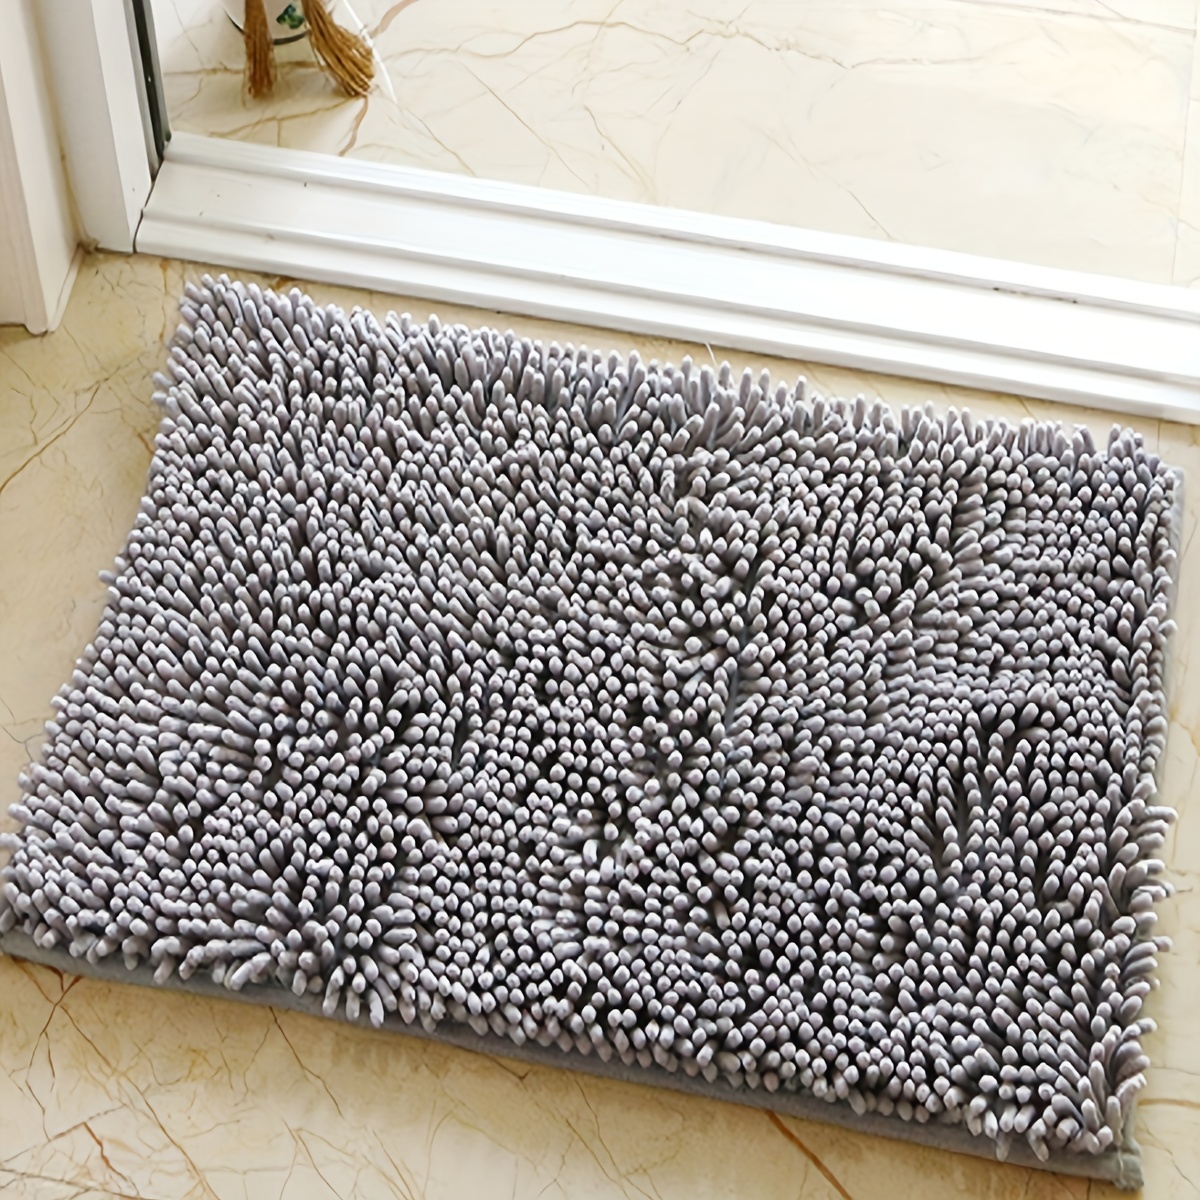 Bathroom Rugs Bath Mat Soft And Comfortable,Puffy And Durable Thick Bath Mat,Machine  Washable Bathroom Mats,Non-Slip Bathroom Rugs For Shower And Under Sink 